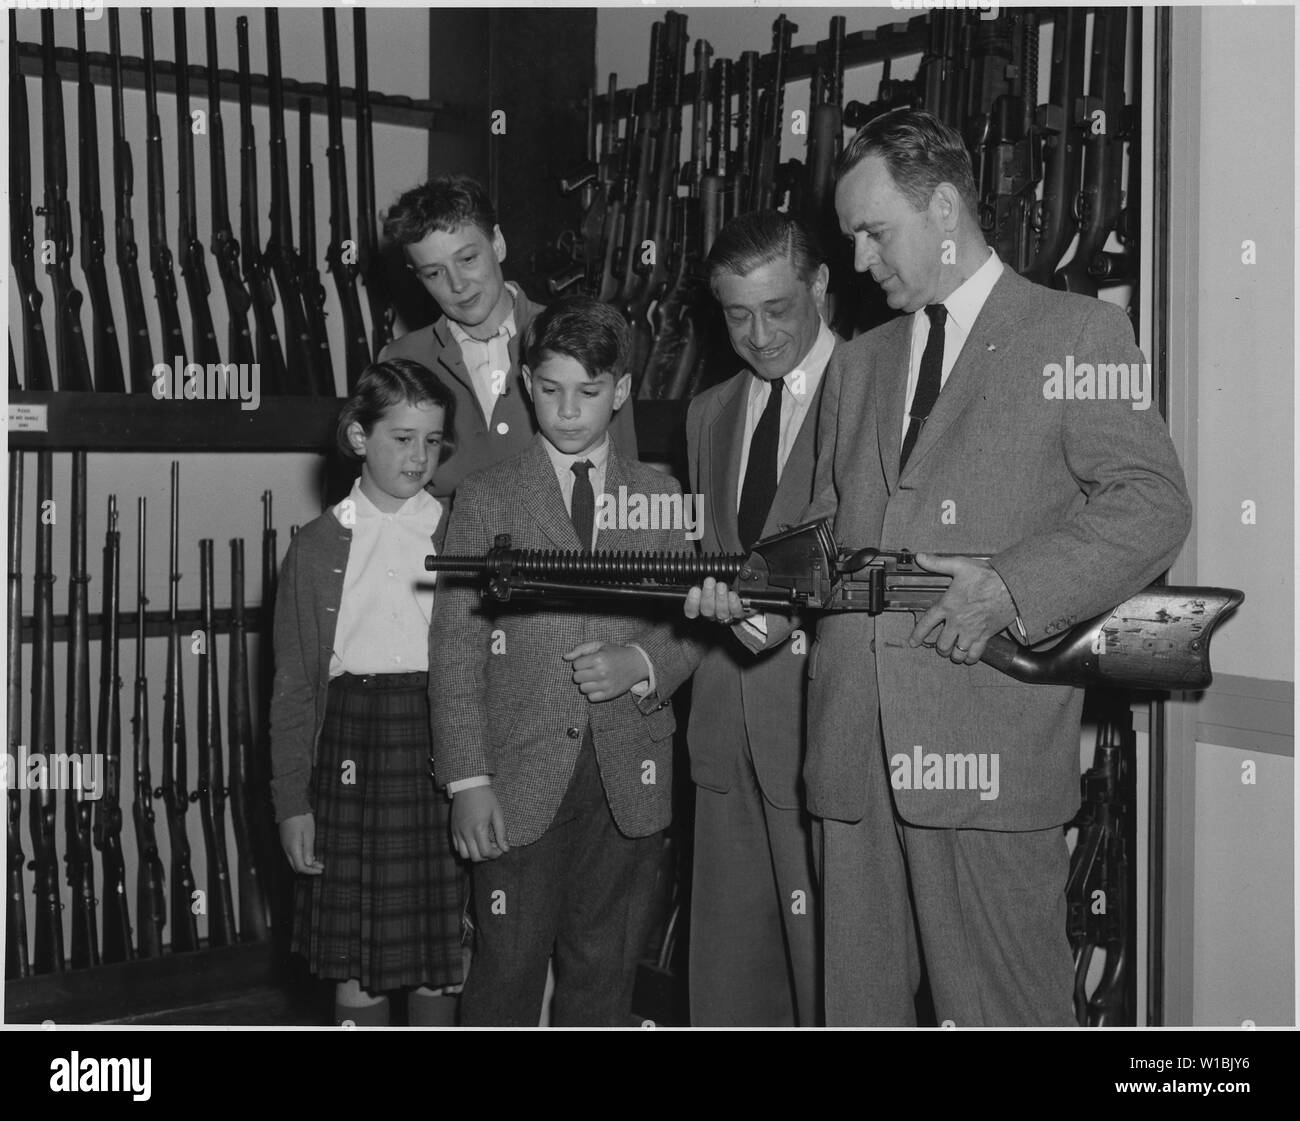 Carl Mydans, who is on the photographic staff of Life magazine, visited FBI Headquarters with his family and was conducted on a tour by Special Agent Donald G. Hanning. Mr. Mydans, his wife and Special Agent Hanning were prisoners of war of the Japanese in the Philippines and renewed their acquaintanceship and viewed a Japanese machine gun in the Firearms Section of the FBI Laboratory. Shown left to right are: Misty Mydans, Mrs. Mydans, Seth Mydans, Mr. Mydans, and Special Agent Hanning. Stock Photo